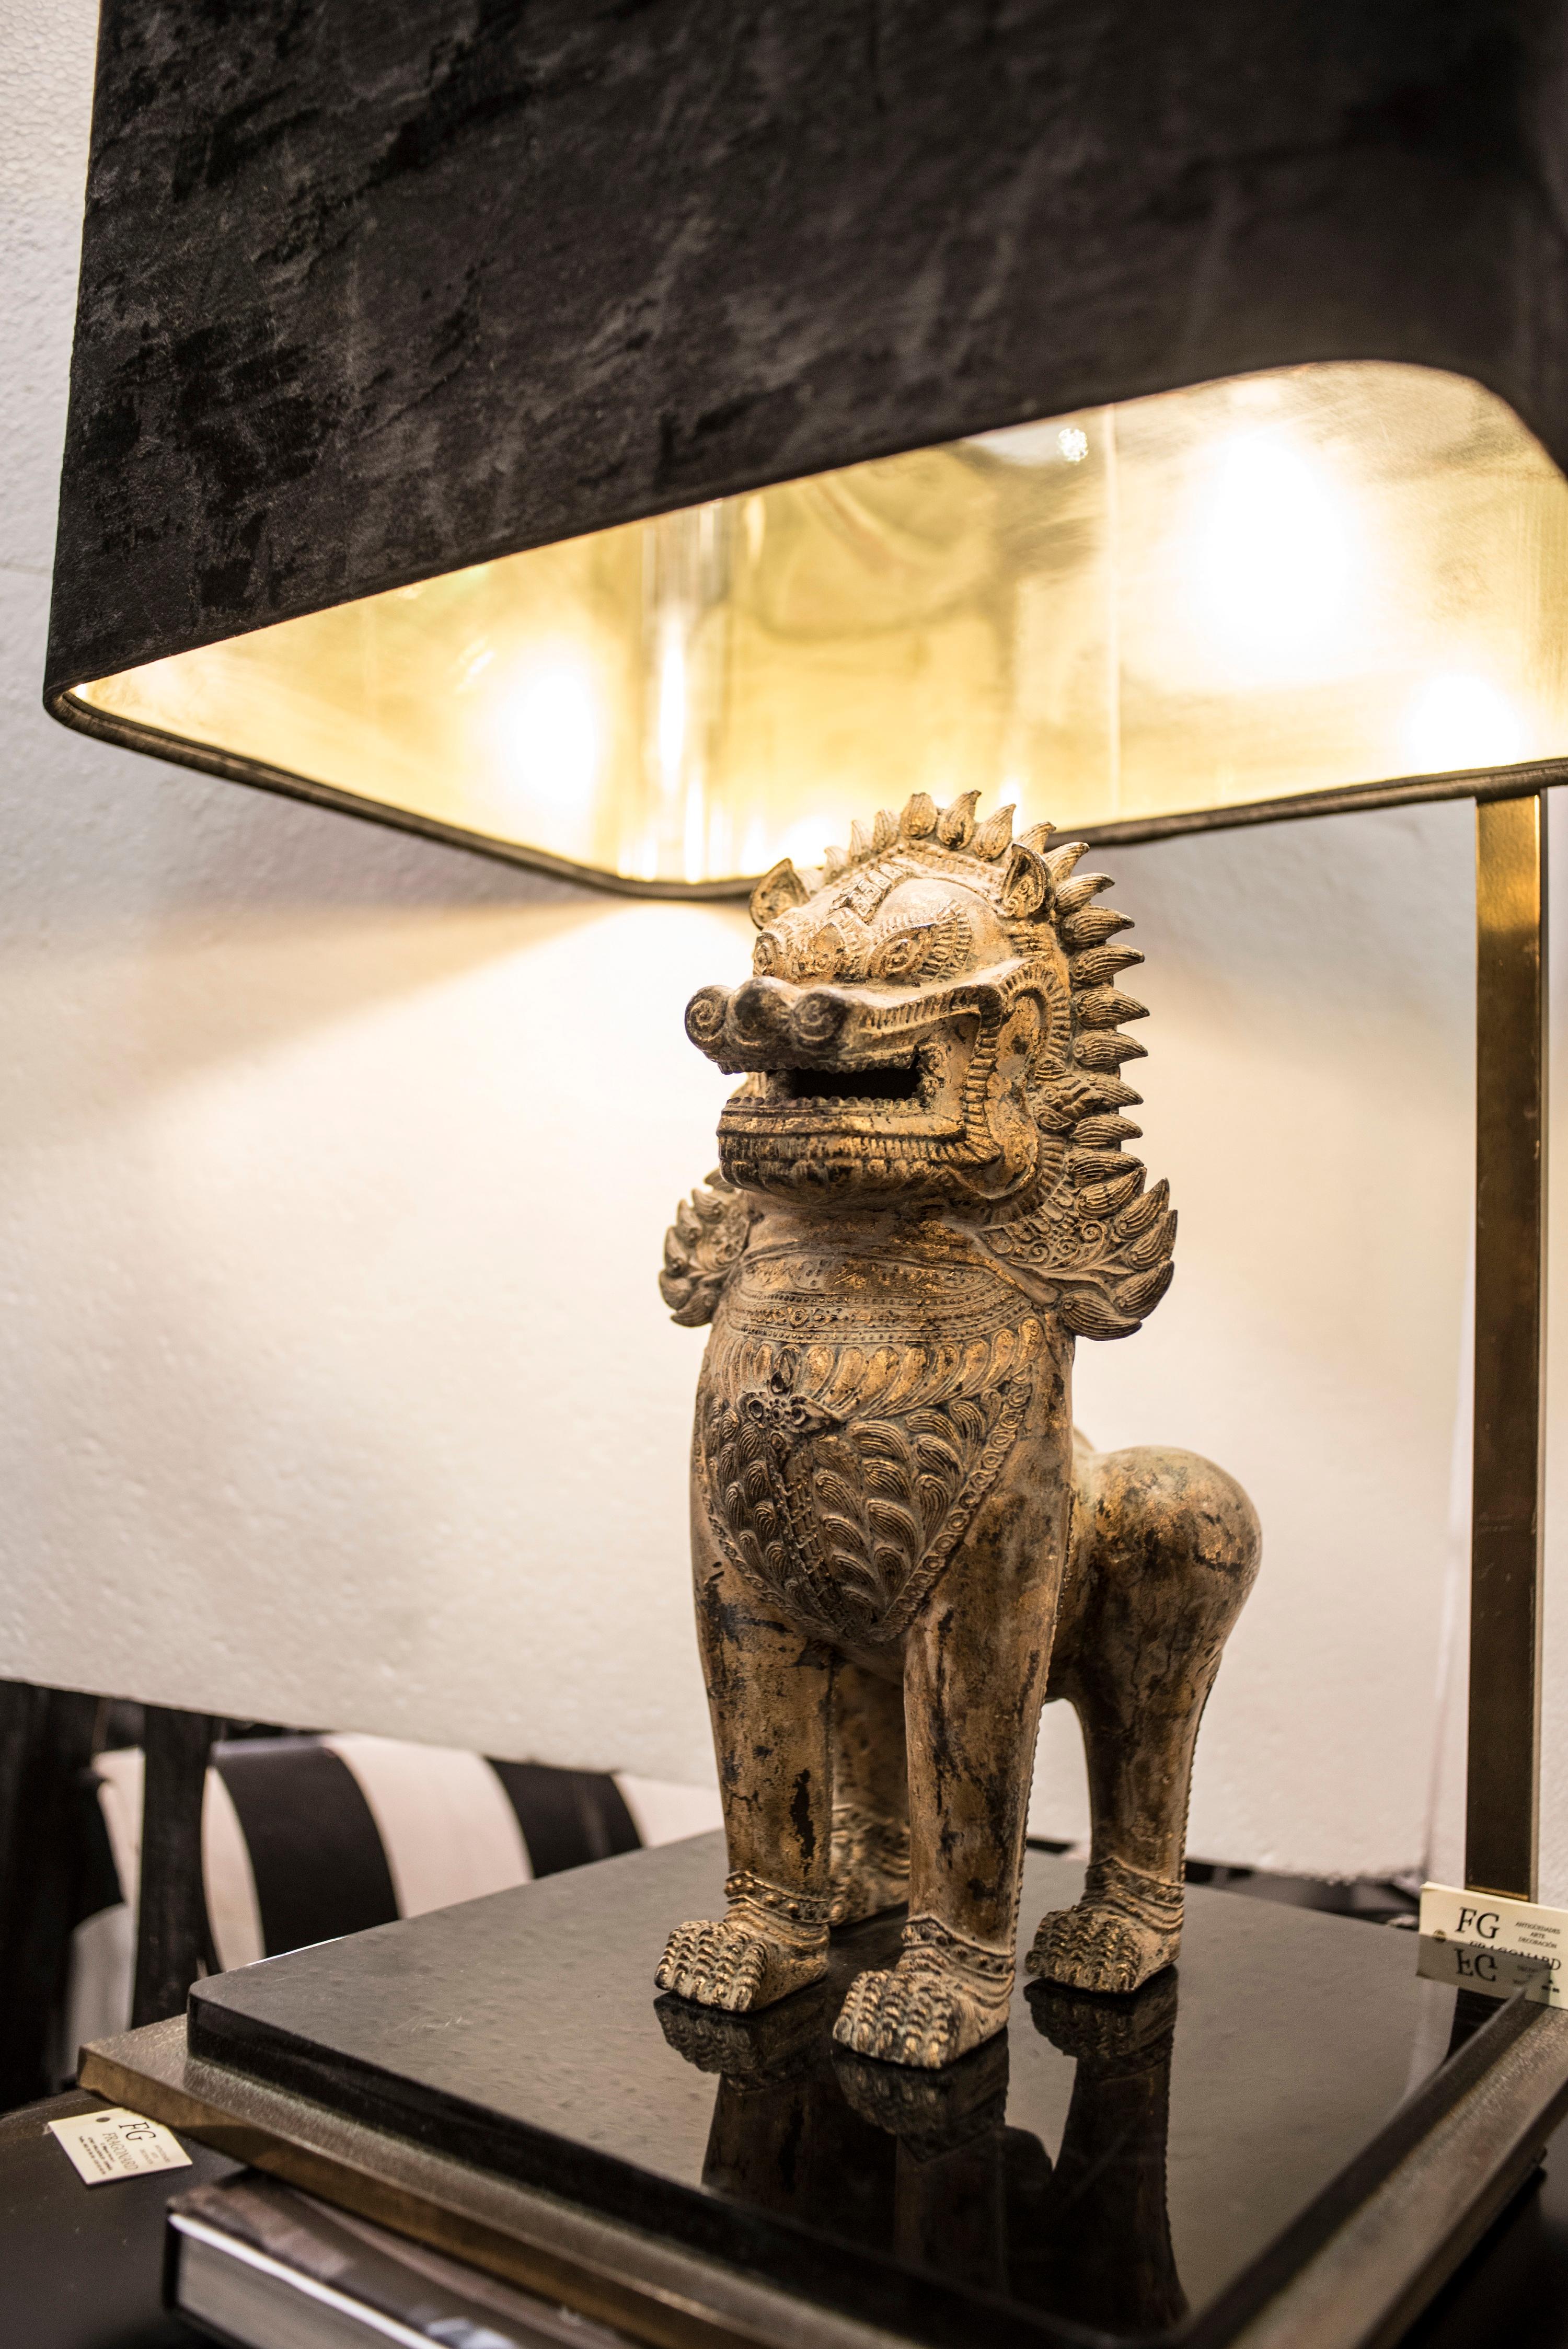 Awesome midcentury bronze Lion of Foo or dragon on base of black Bakelite and golden brass with an exquisite tulip in black velvet and golden interior.
It fits in any environment or style life. A touch of glamour in any room.
It comes from a private